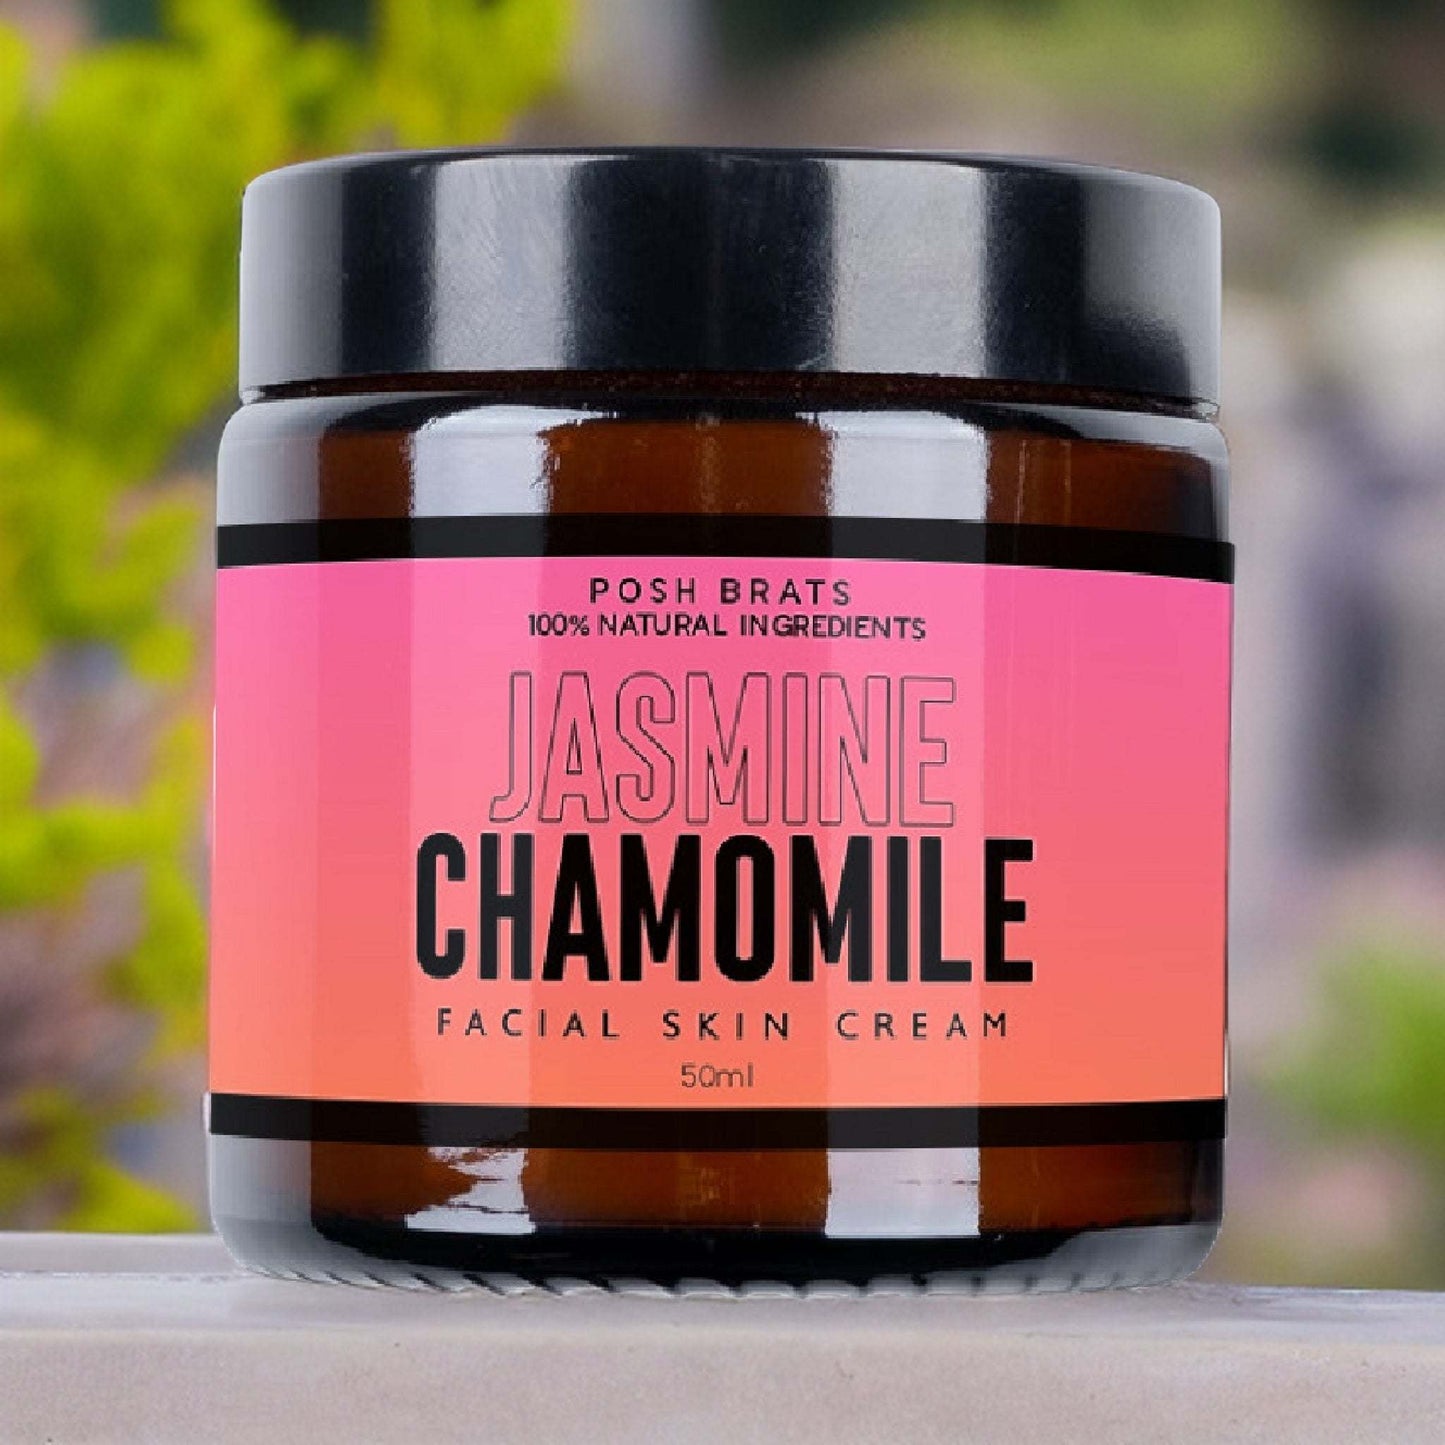 Jasmine Chamomile Aromatherapy Facial Skin Cream - indulge in radiant skin with the calming, soothing power of nature.